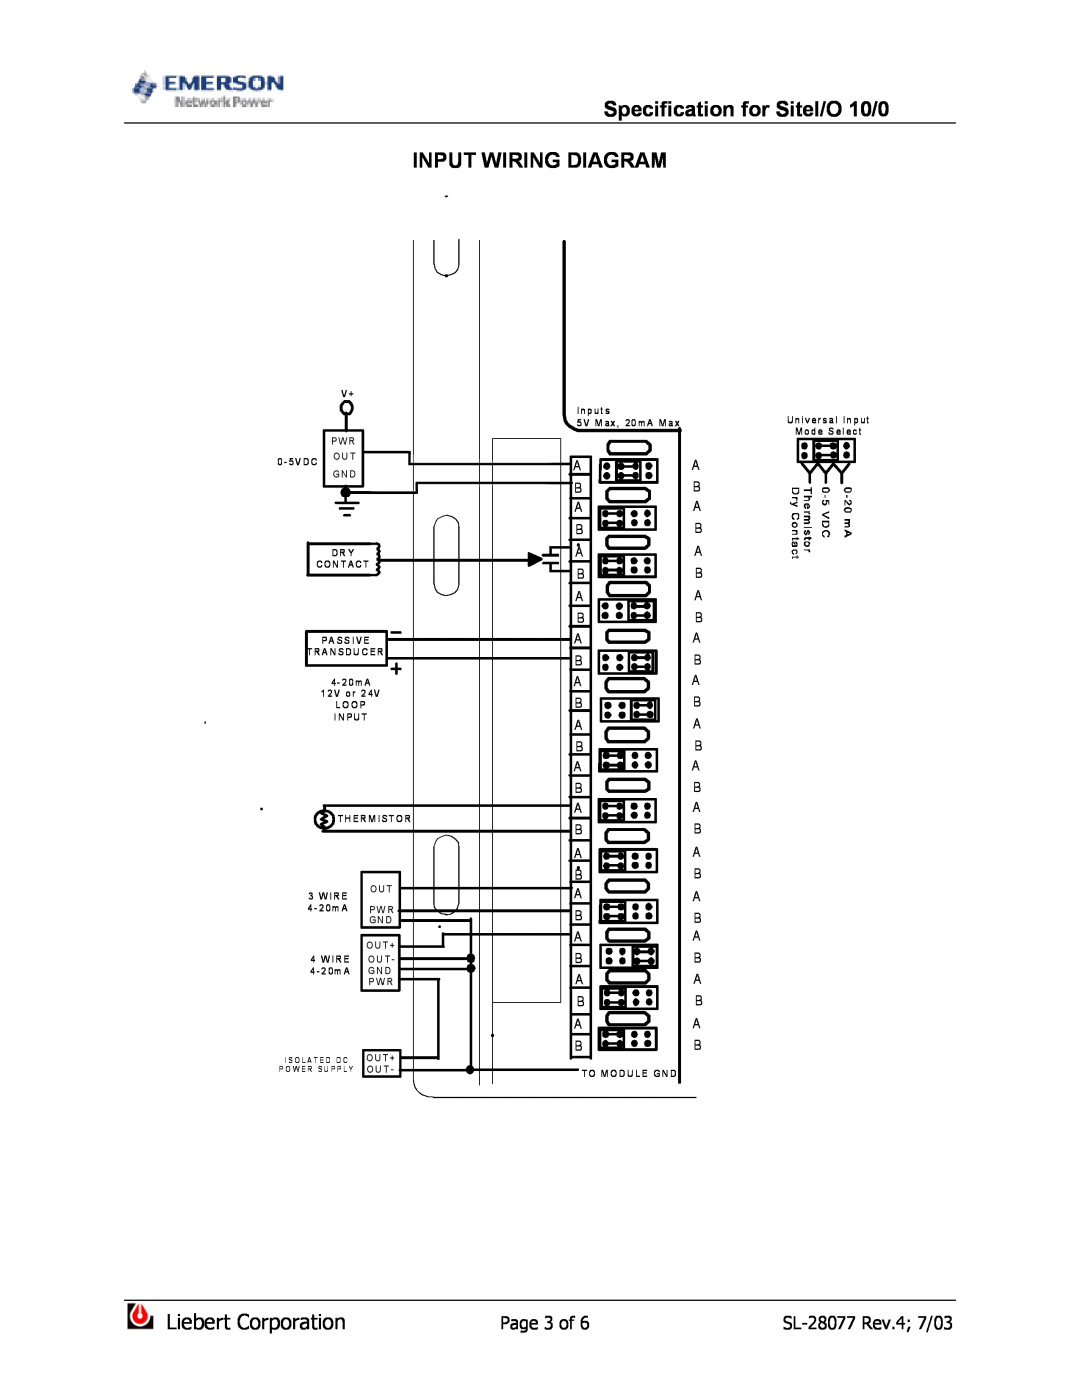 Emerson SiteI/O-Line dimensions Input Wiring Diagram, Page 3 of, Specification for SiteI/O 10/0, Liebert Corporation 